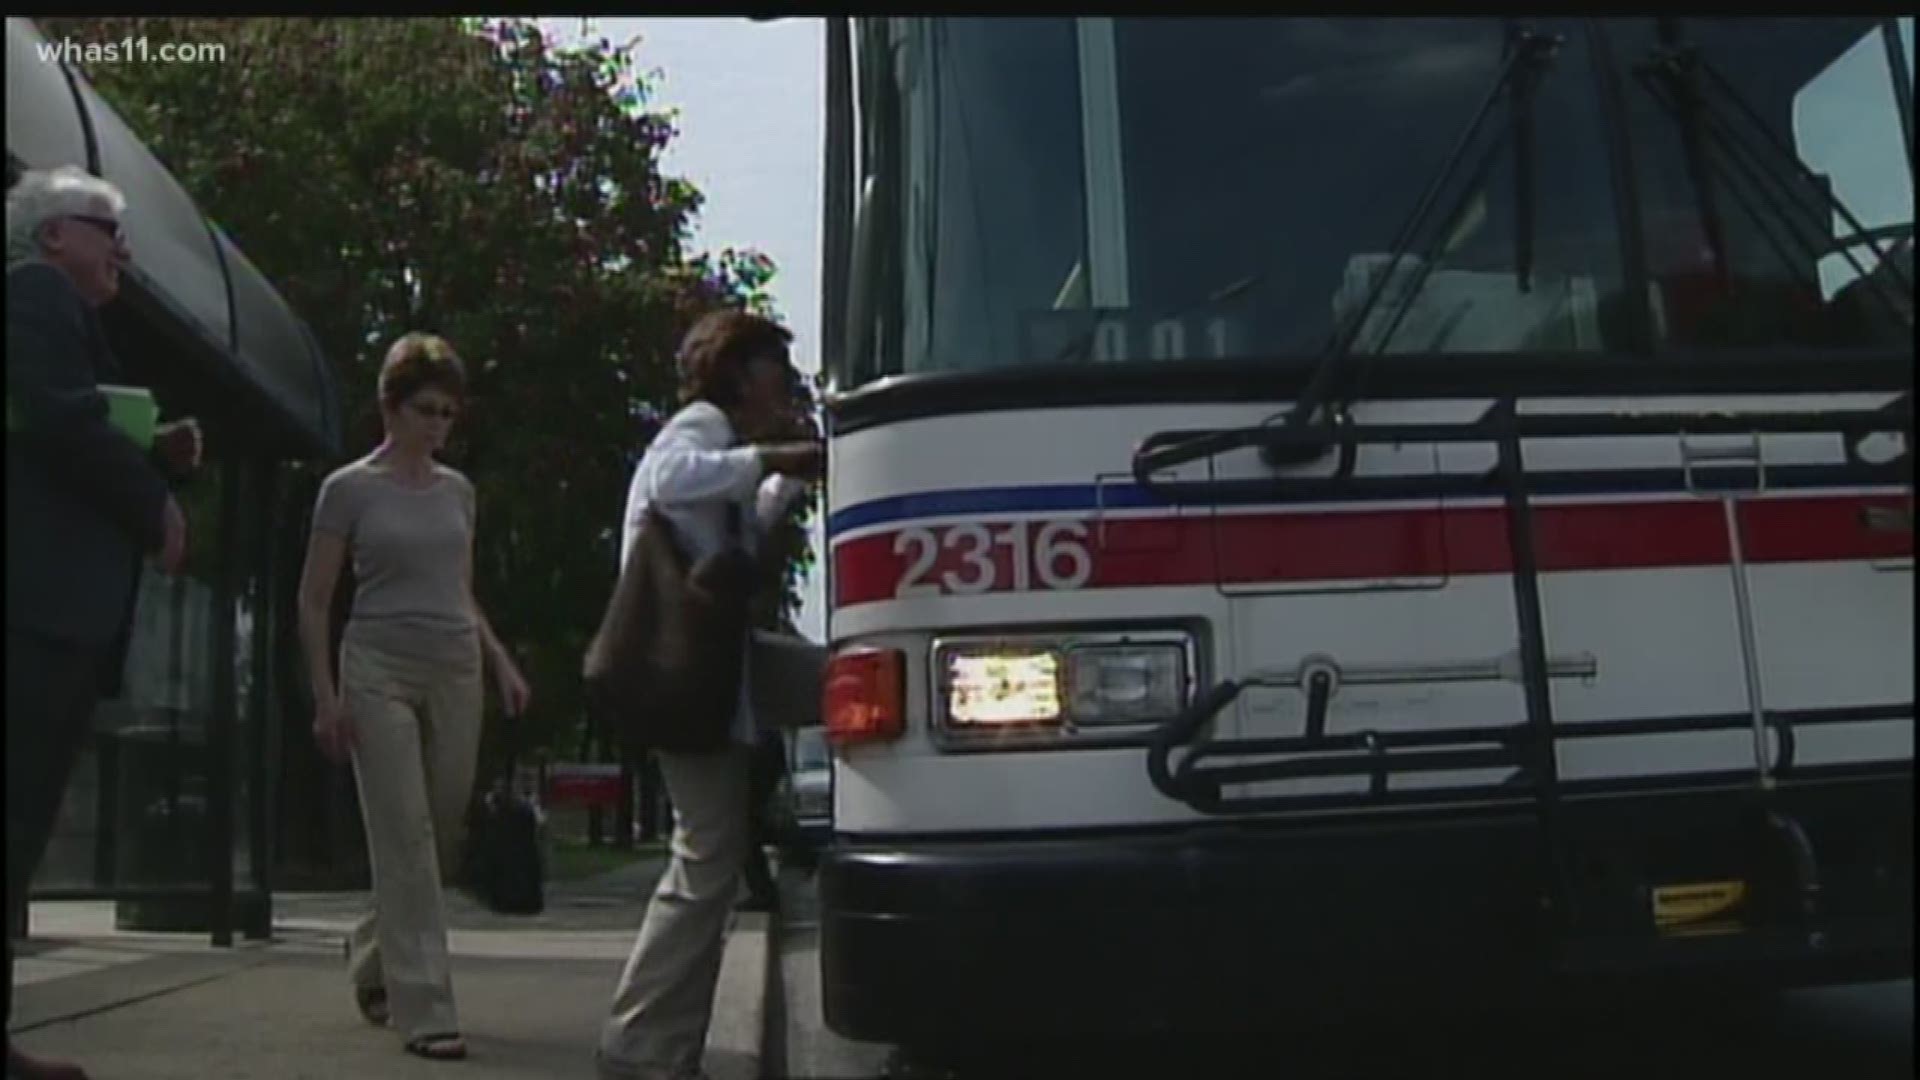 The new TARC app will help users link different forms of transit together to ease their journey